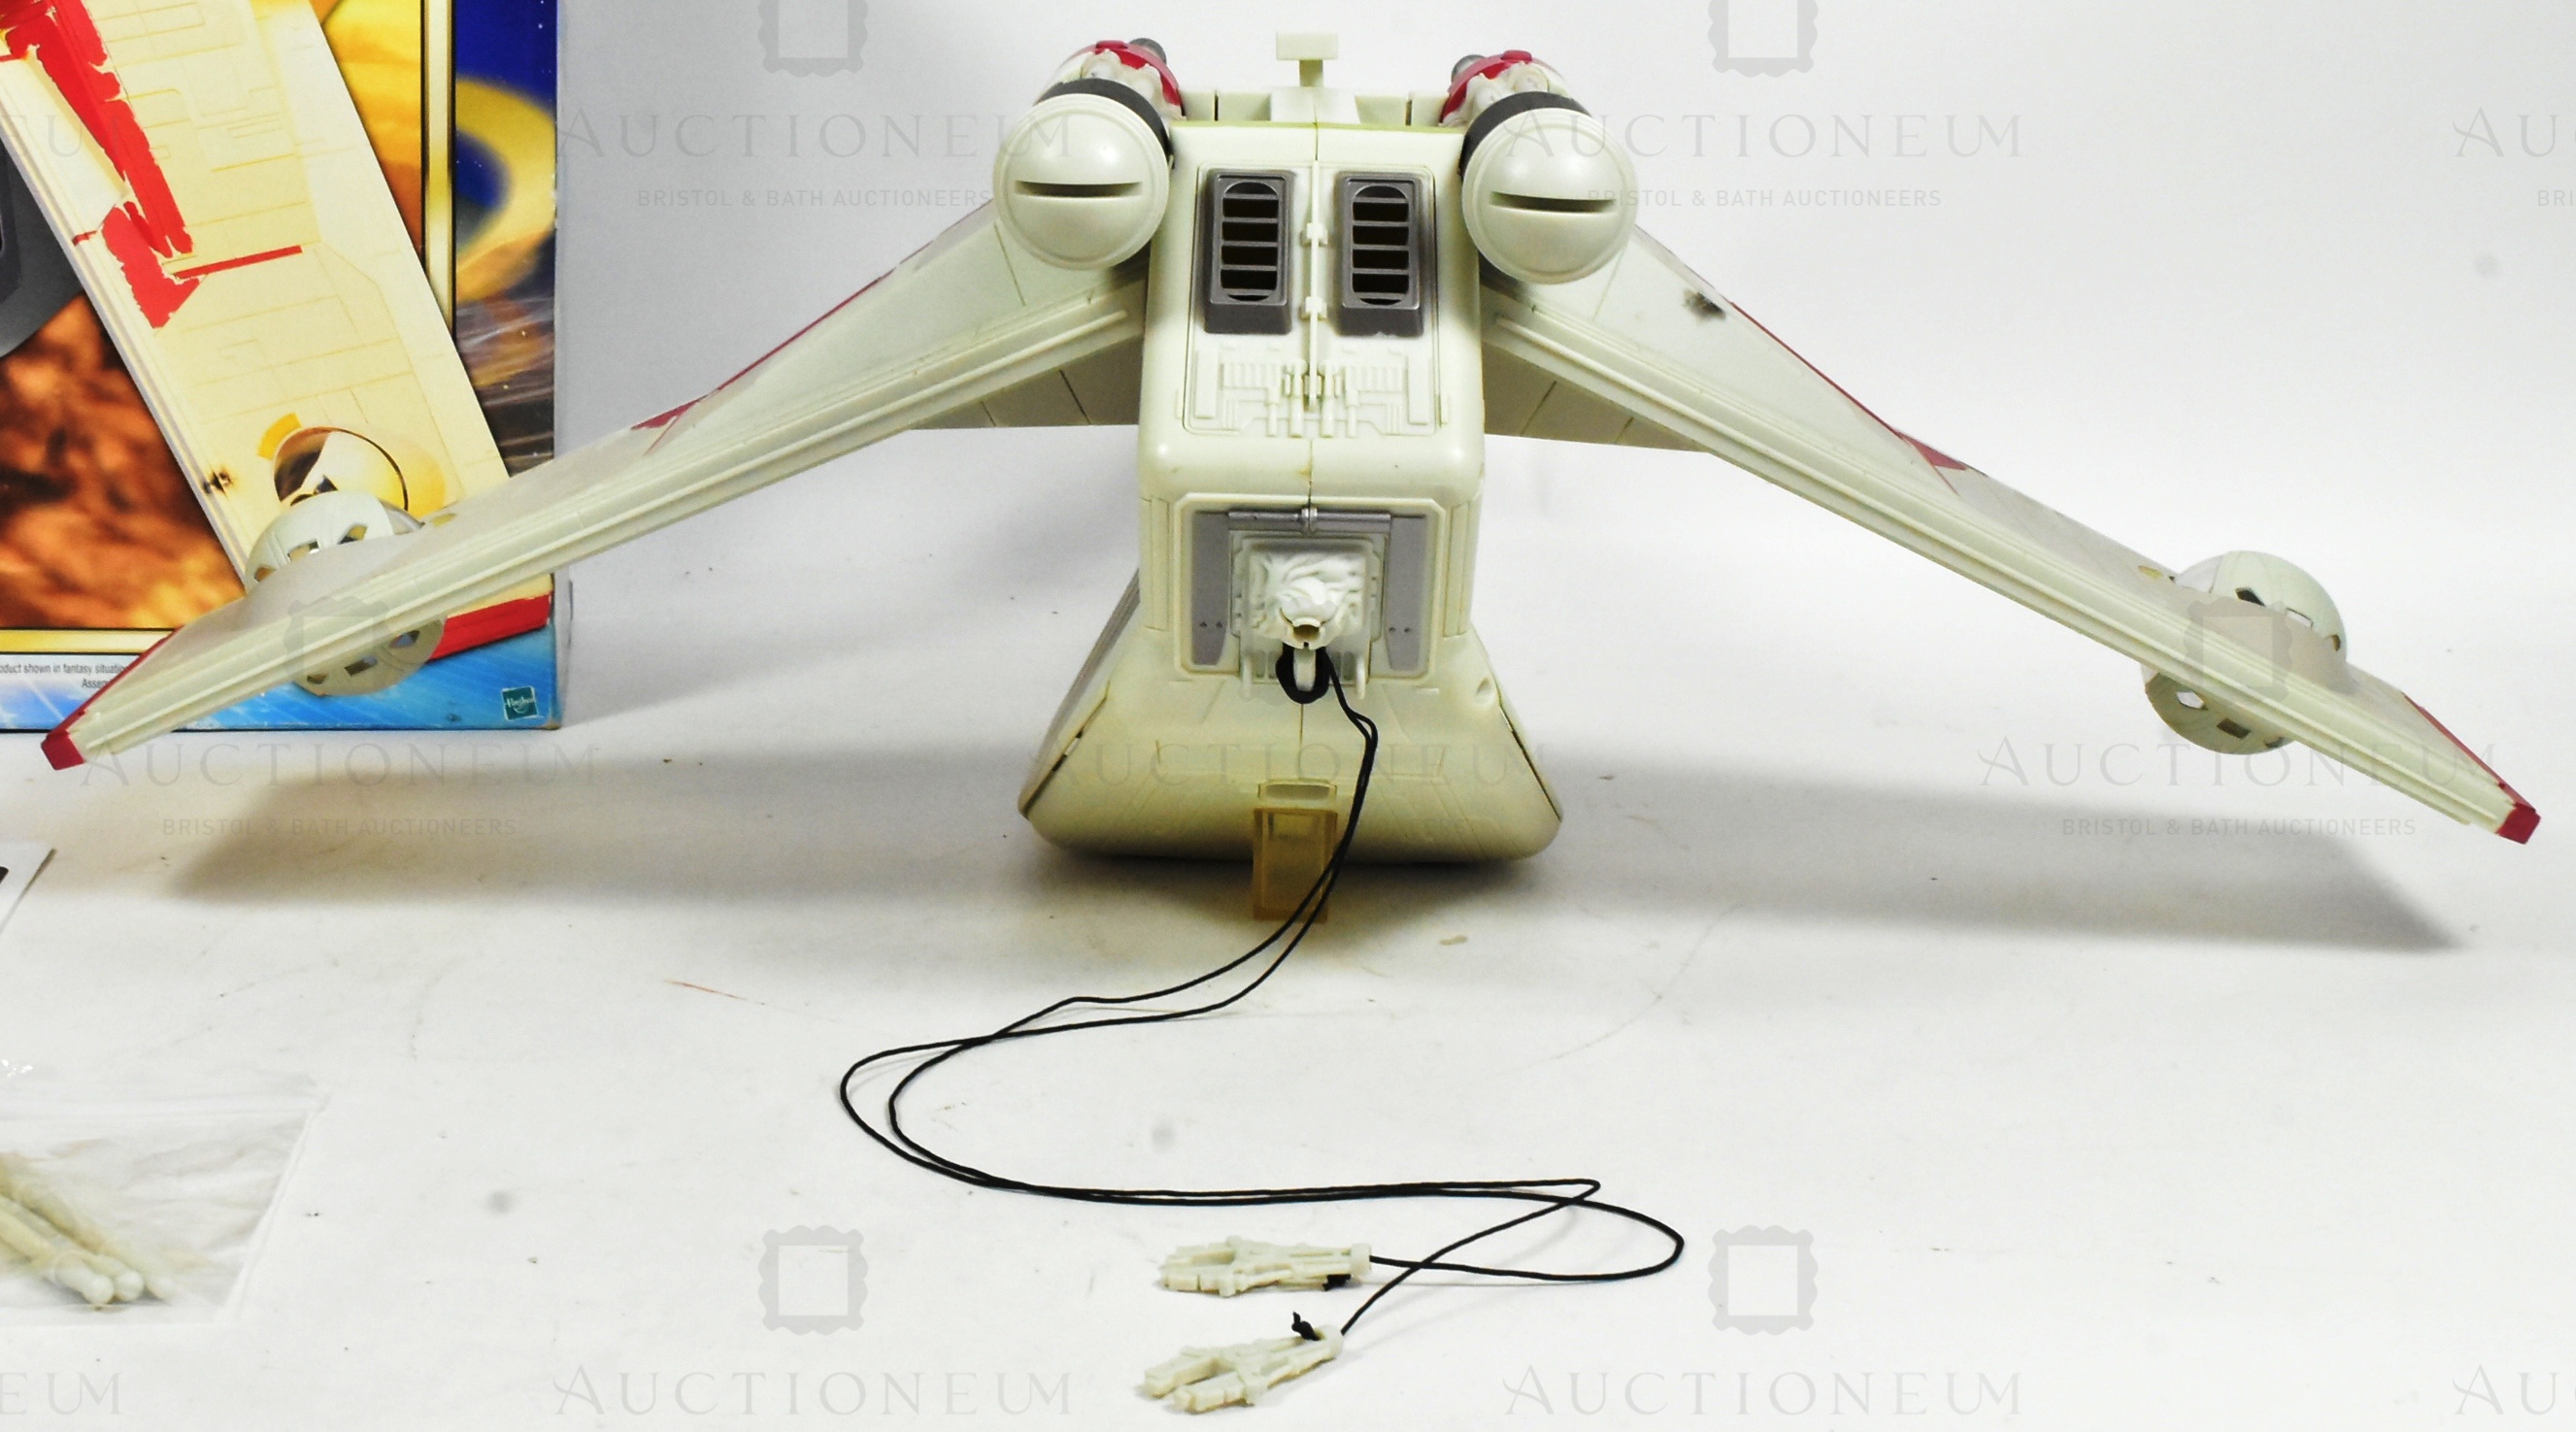 STAR WARS - ATTACK OF THE CLONES - REPUBLIC GUNSHIP PLAYSET - Image 4 of 5